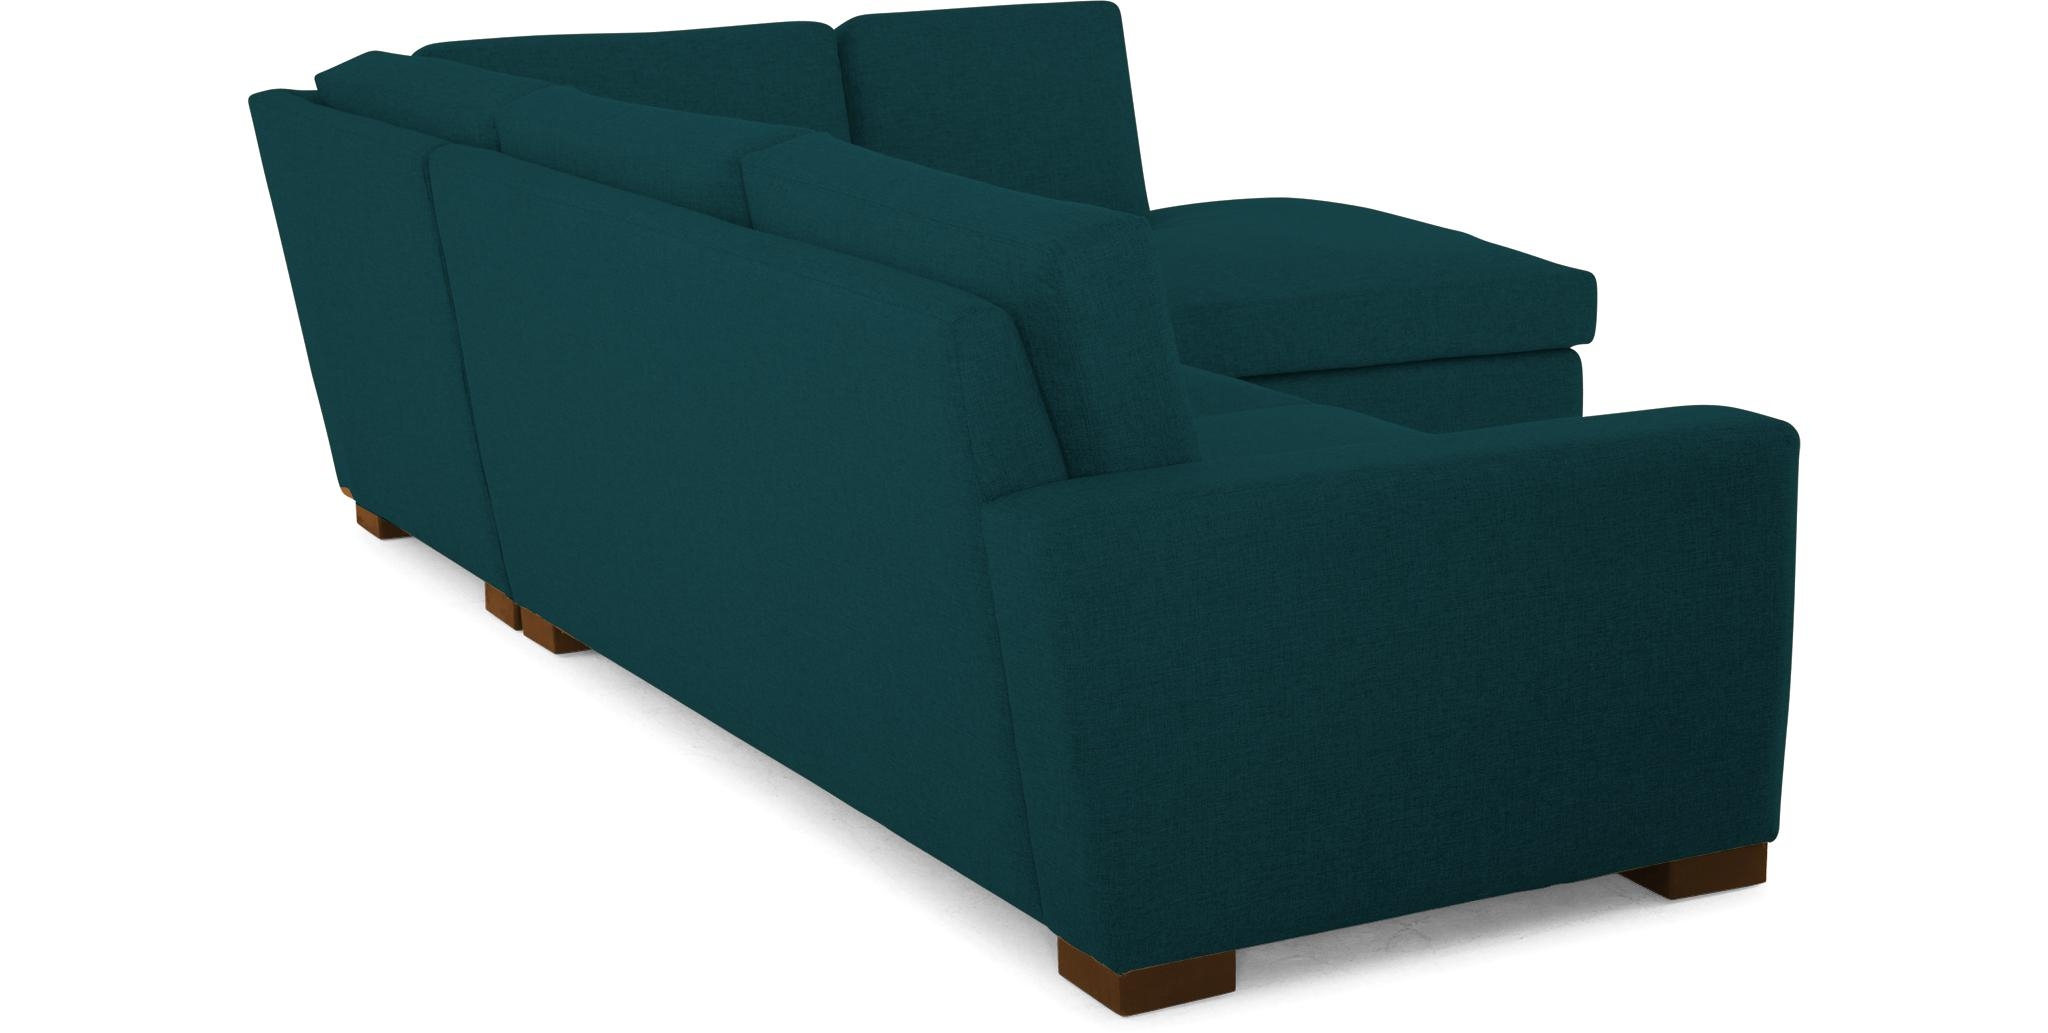 Blue Anton Mid Century Modern Sectional with Bumper - Royale Peacock - Mocha - Right  - Image 3